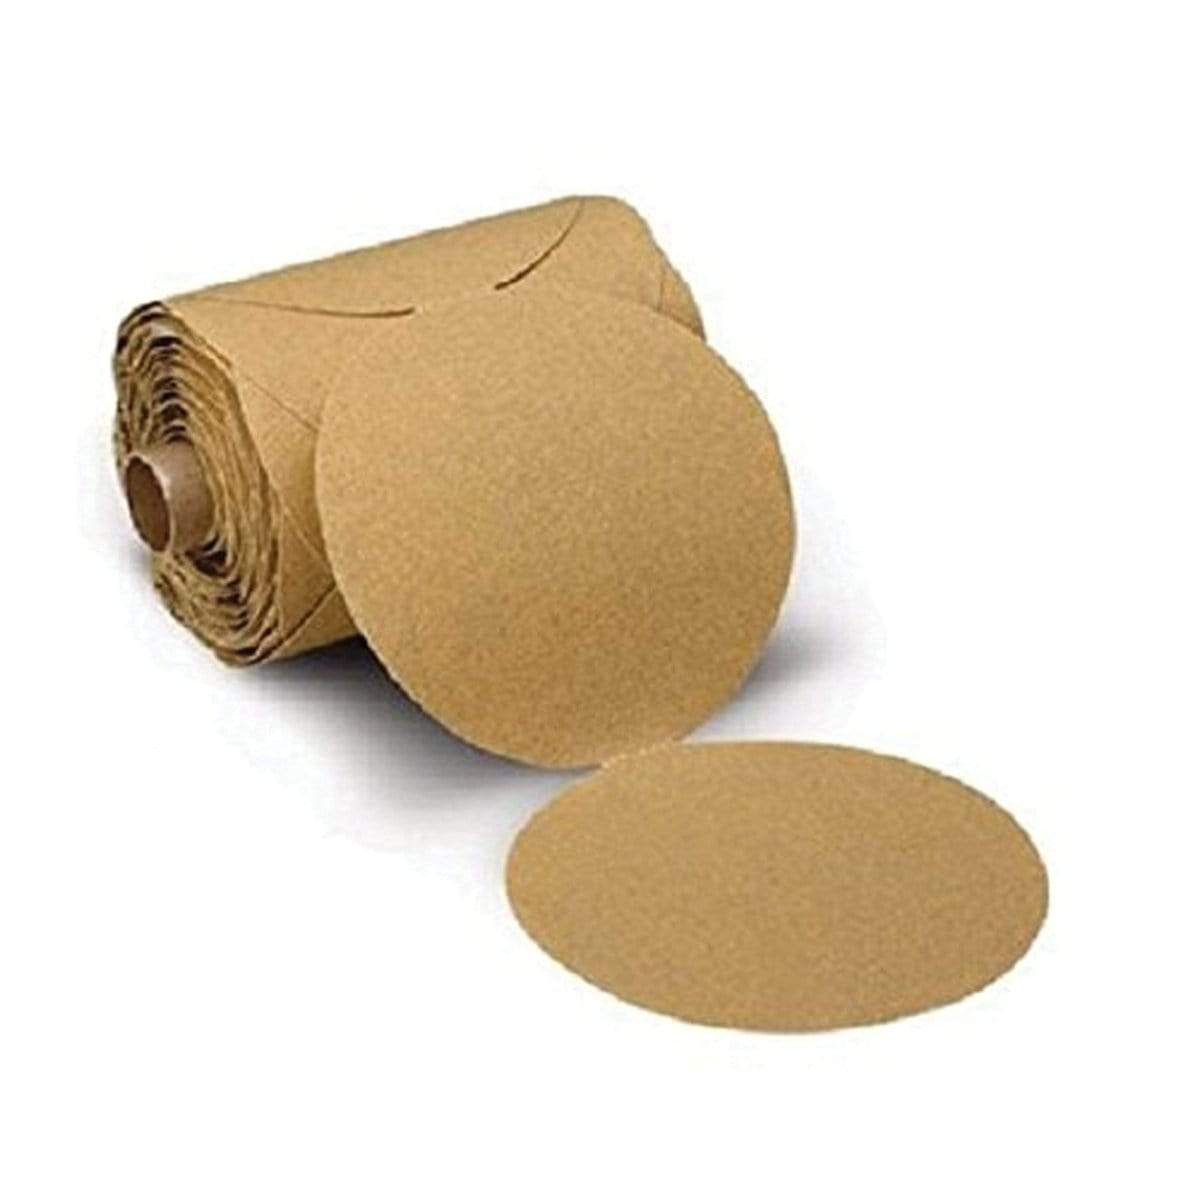 3M Marine Qualifies for Free Shipping 3M Stikit Paper Disc Roll 236u 6" Nh P100 C-Weight 100-pc #55561